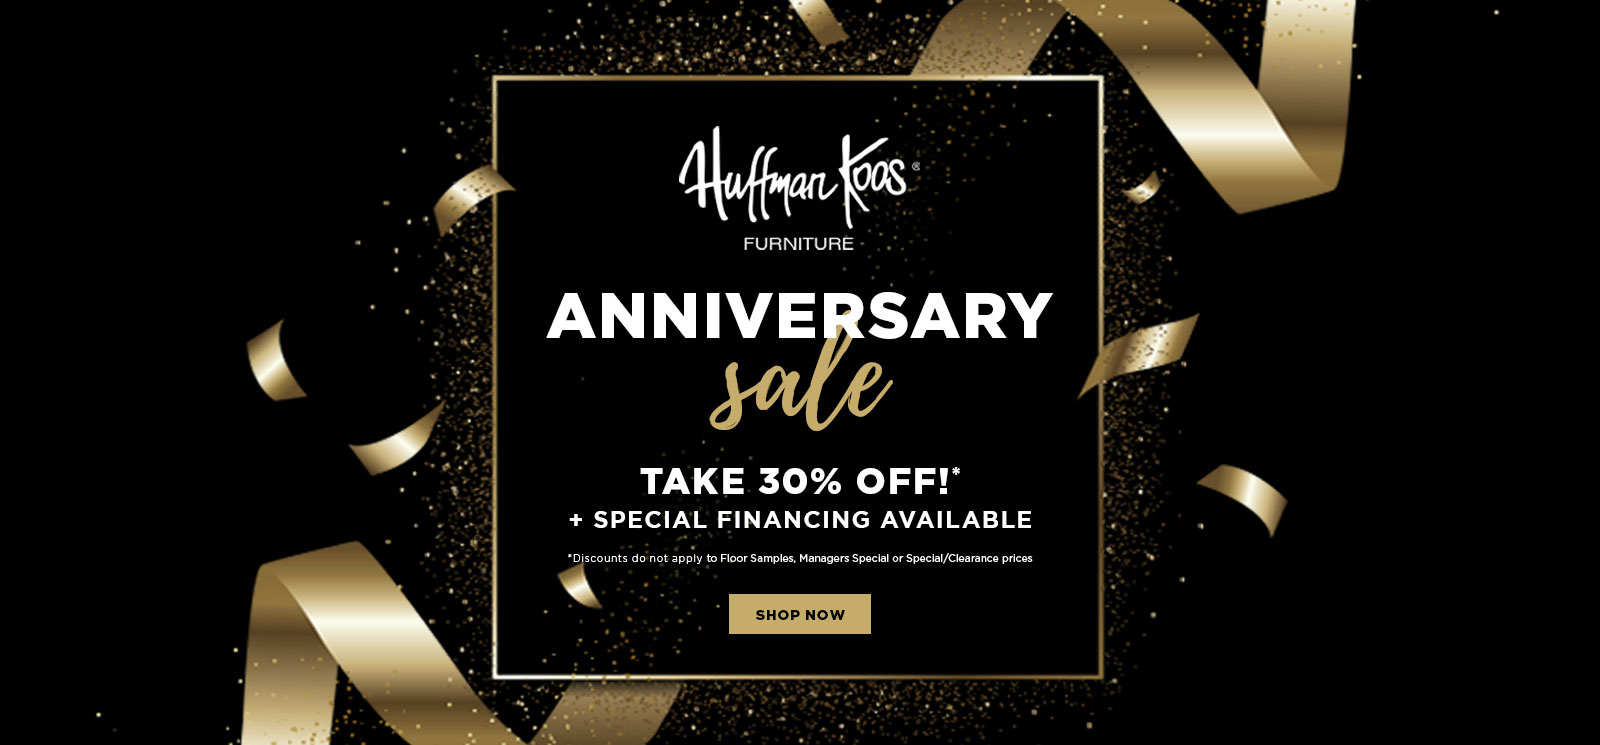 Anniversary Sale - Take 30% Off + Special Financing Available